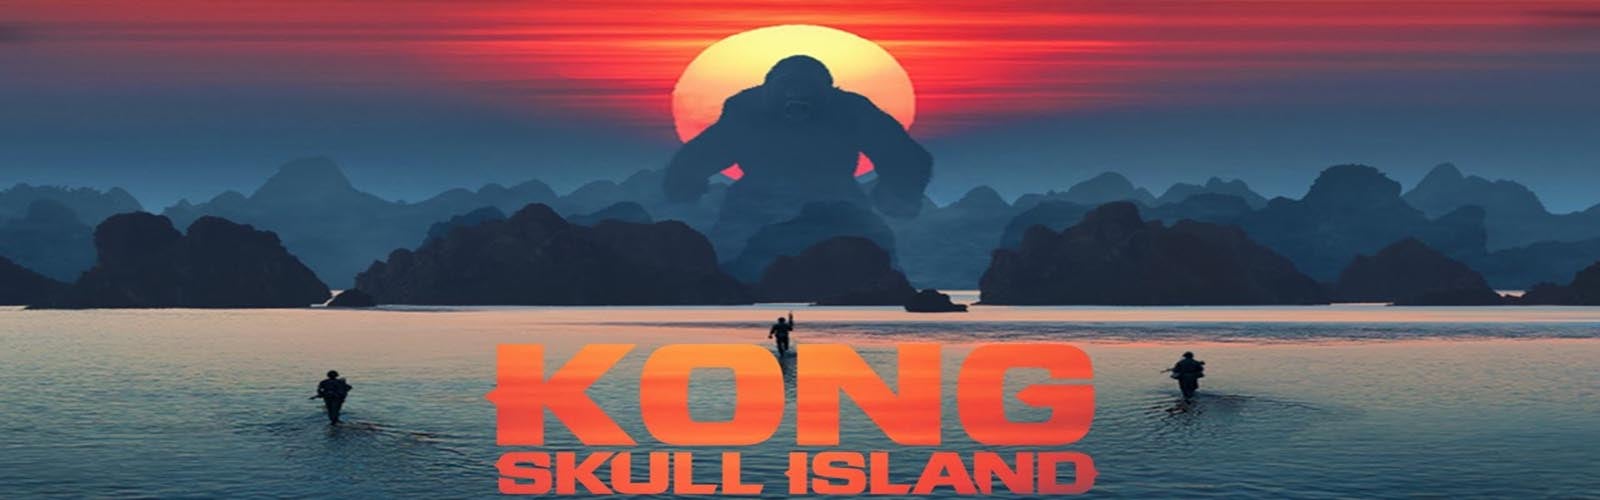 Box Office - 'Kong: Skull Island' rules with mighty $61 million debut